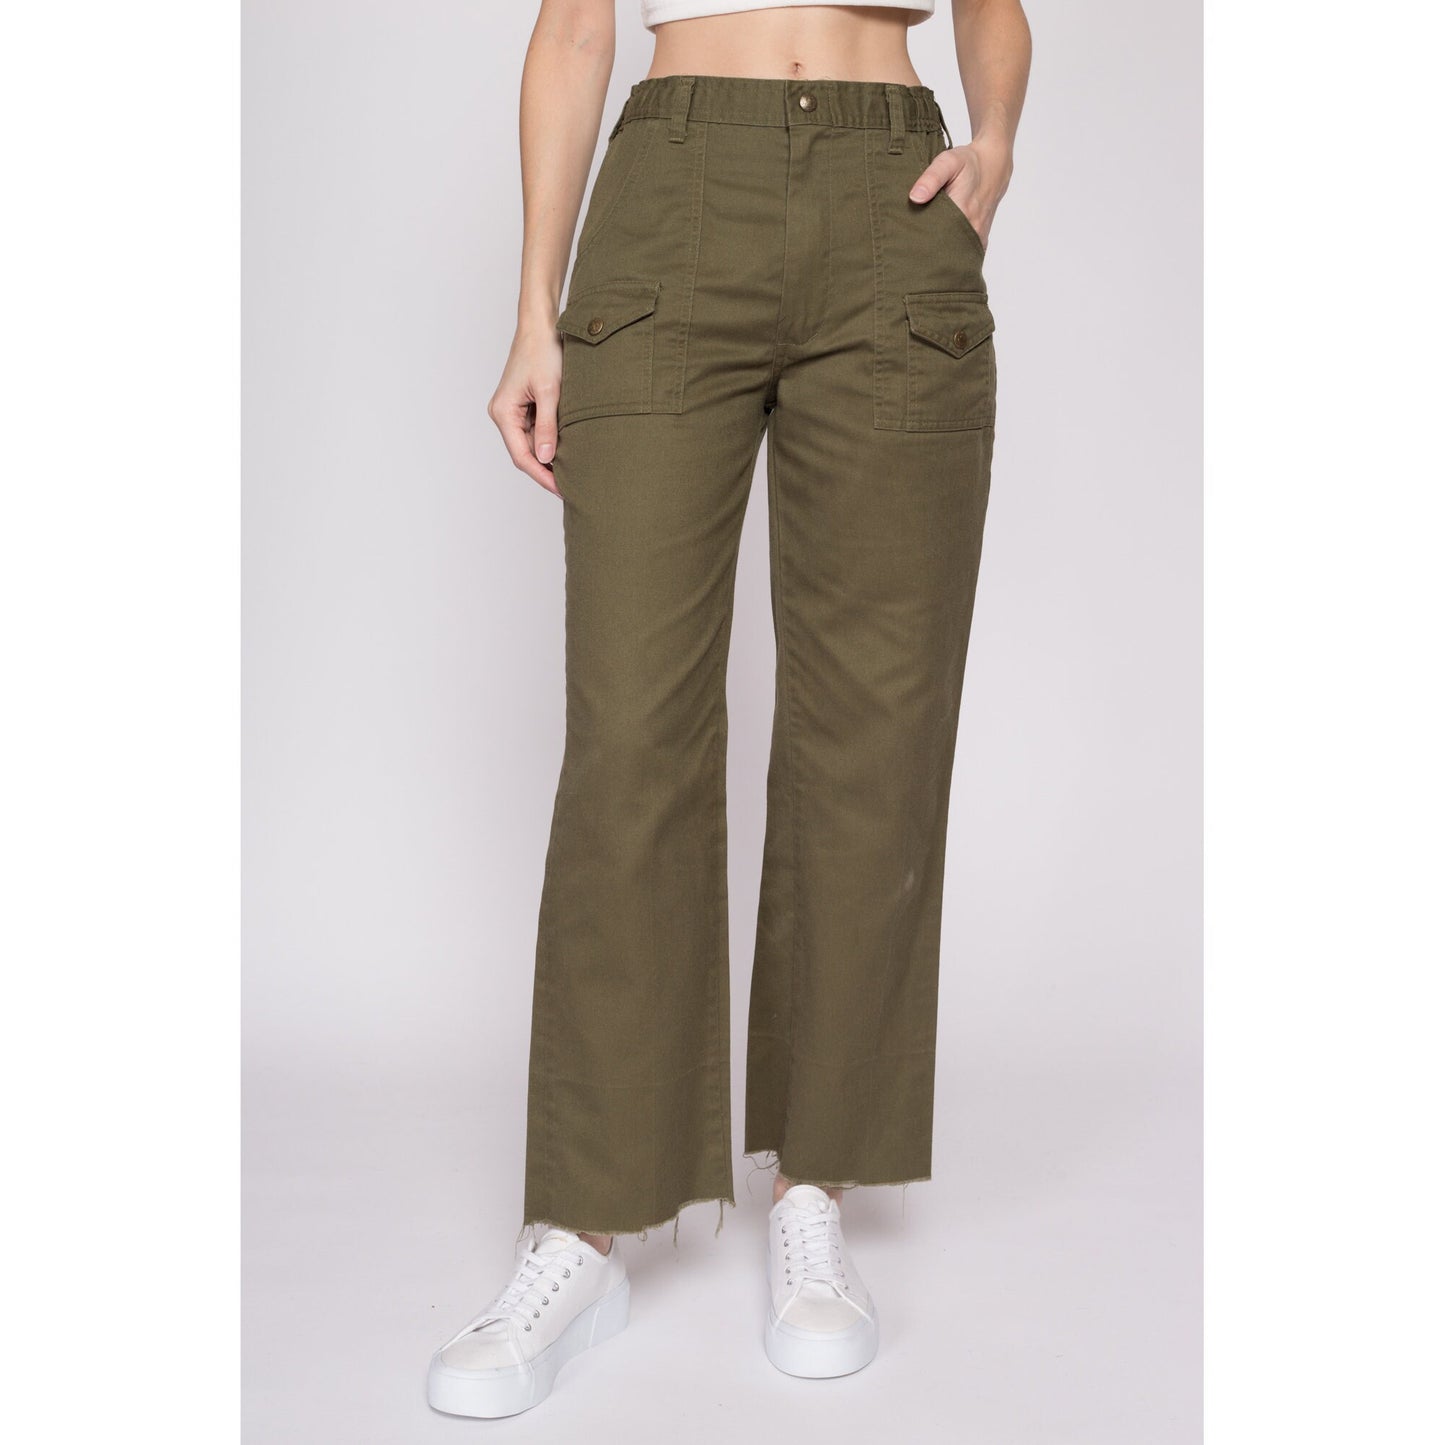 Sml-Med 70s Boy Scout Uniform Pants 27"-29" | Vintage High Waisted Olive Green Utility Cargo Trousers